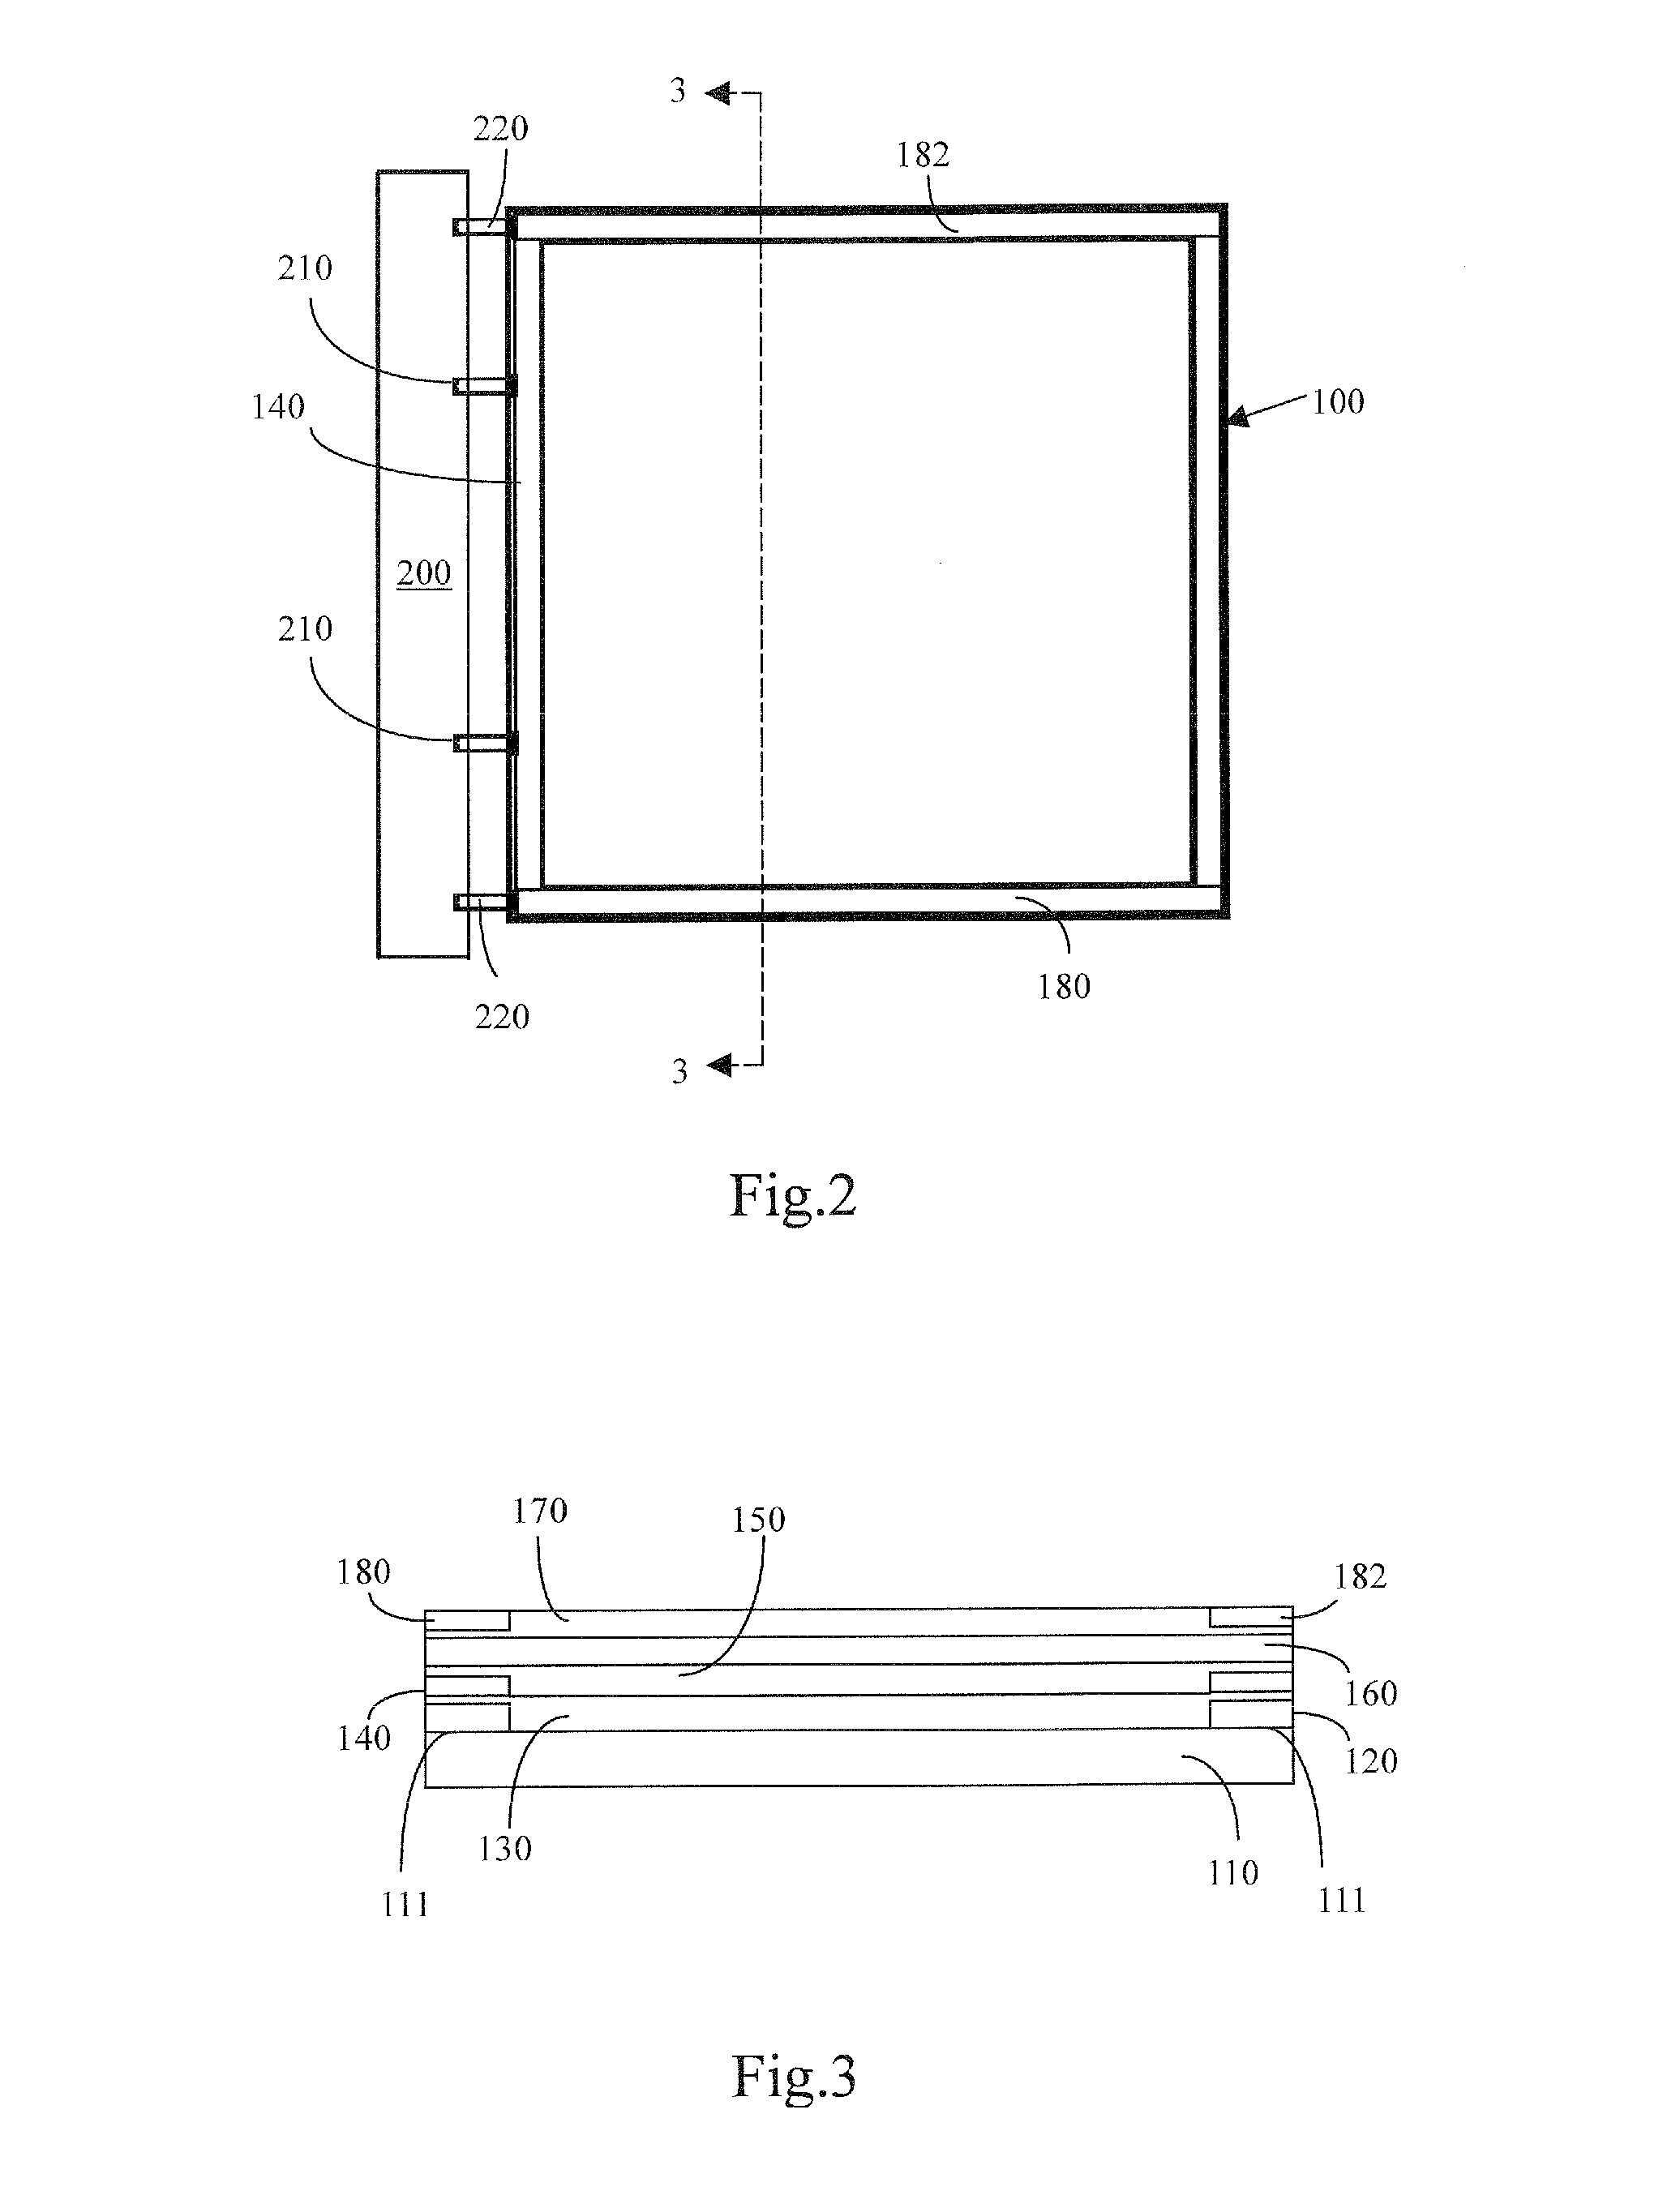 Projected capacitive touch panel